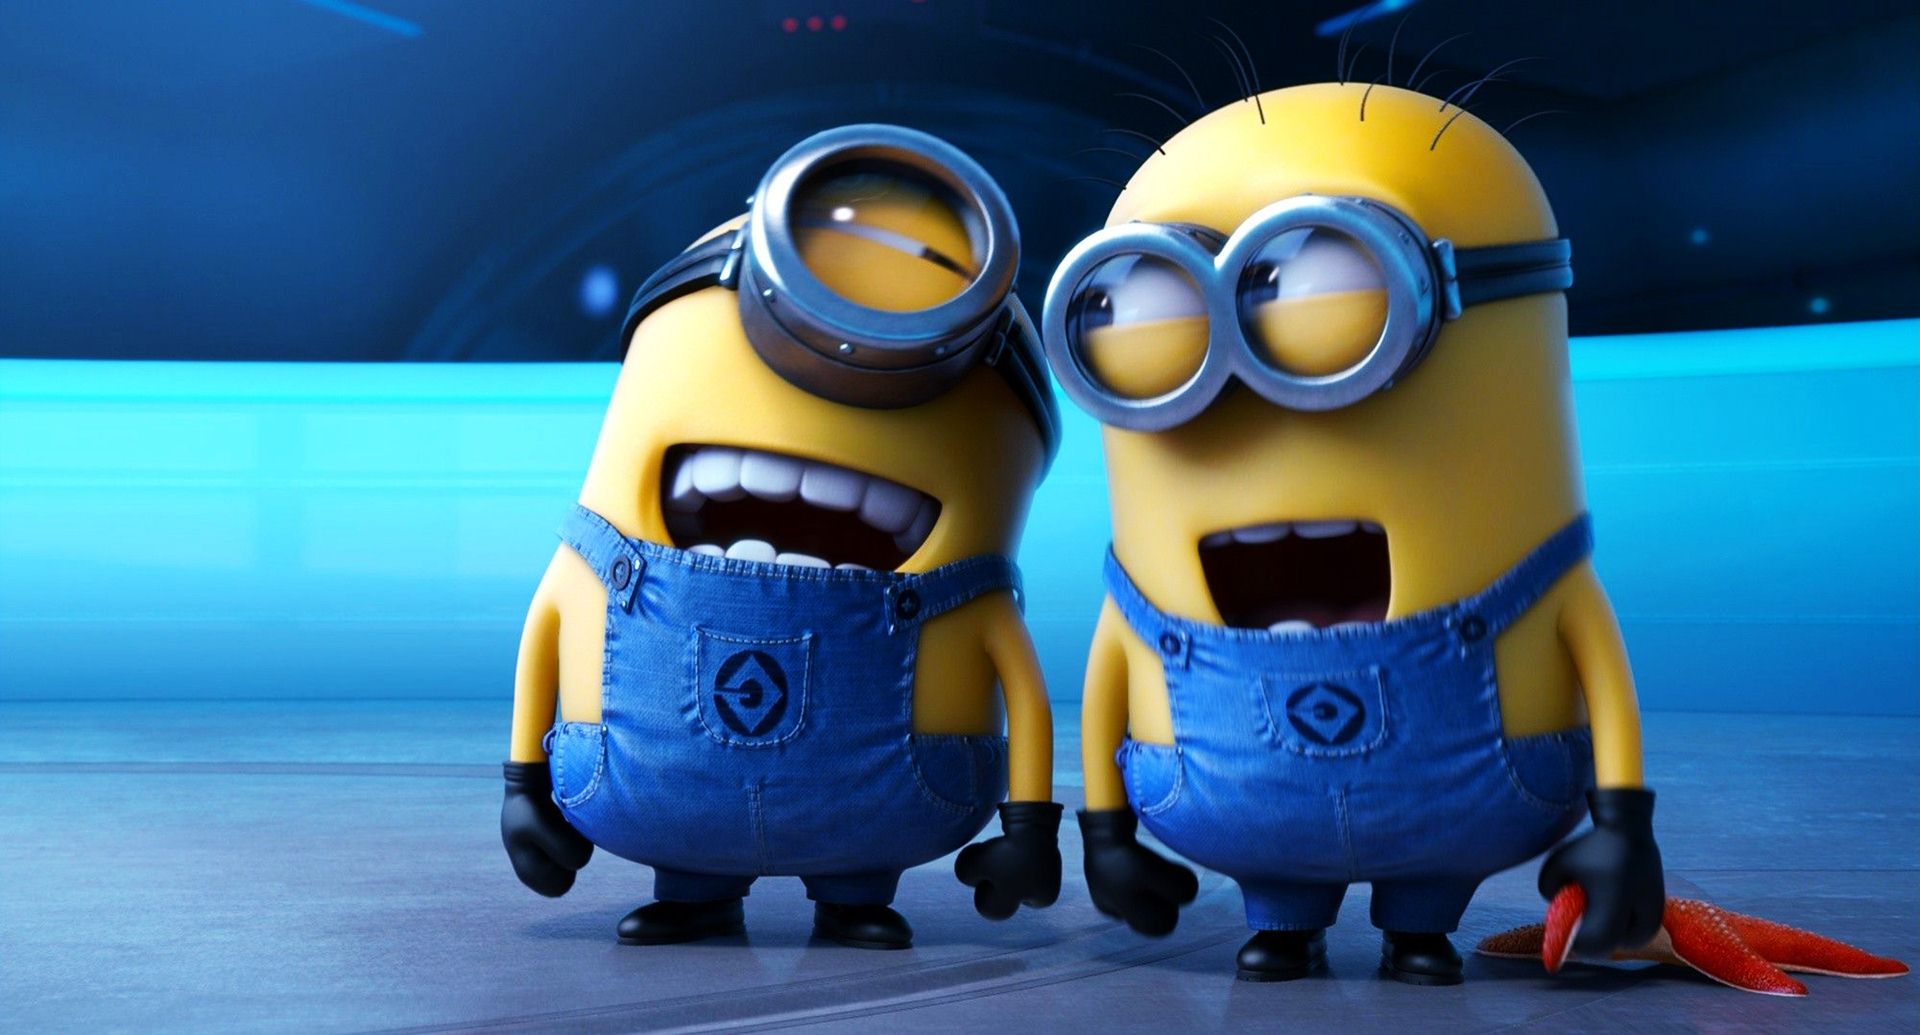 Funny Minions HD Wallpapers 300x250 Funny Minions Wallpapers Cartoon